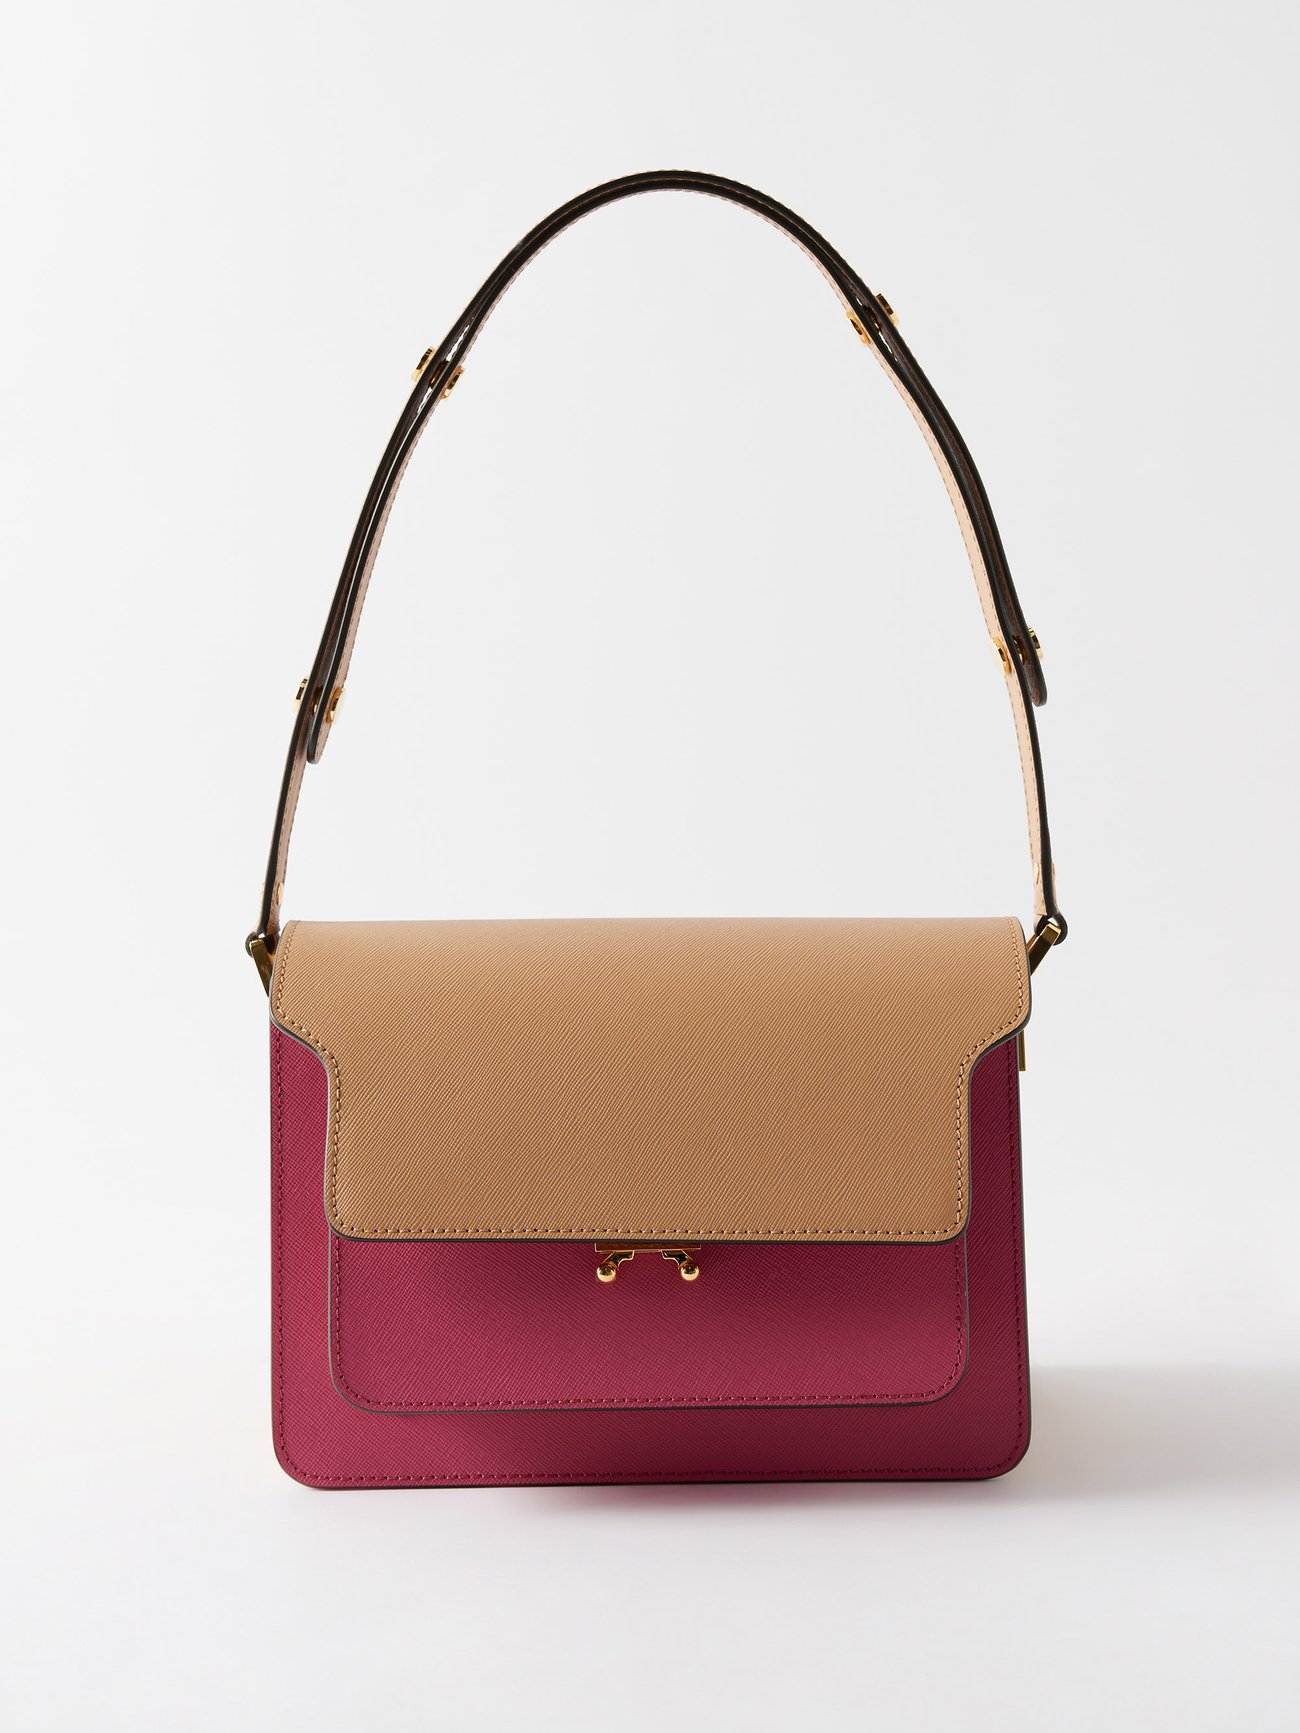 Women's Marni Bags  Shop Online at MATCHESFASHION US